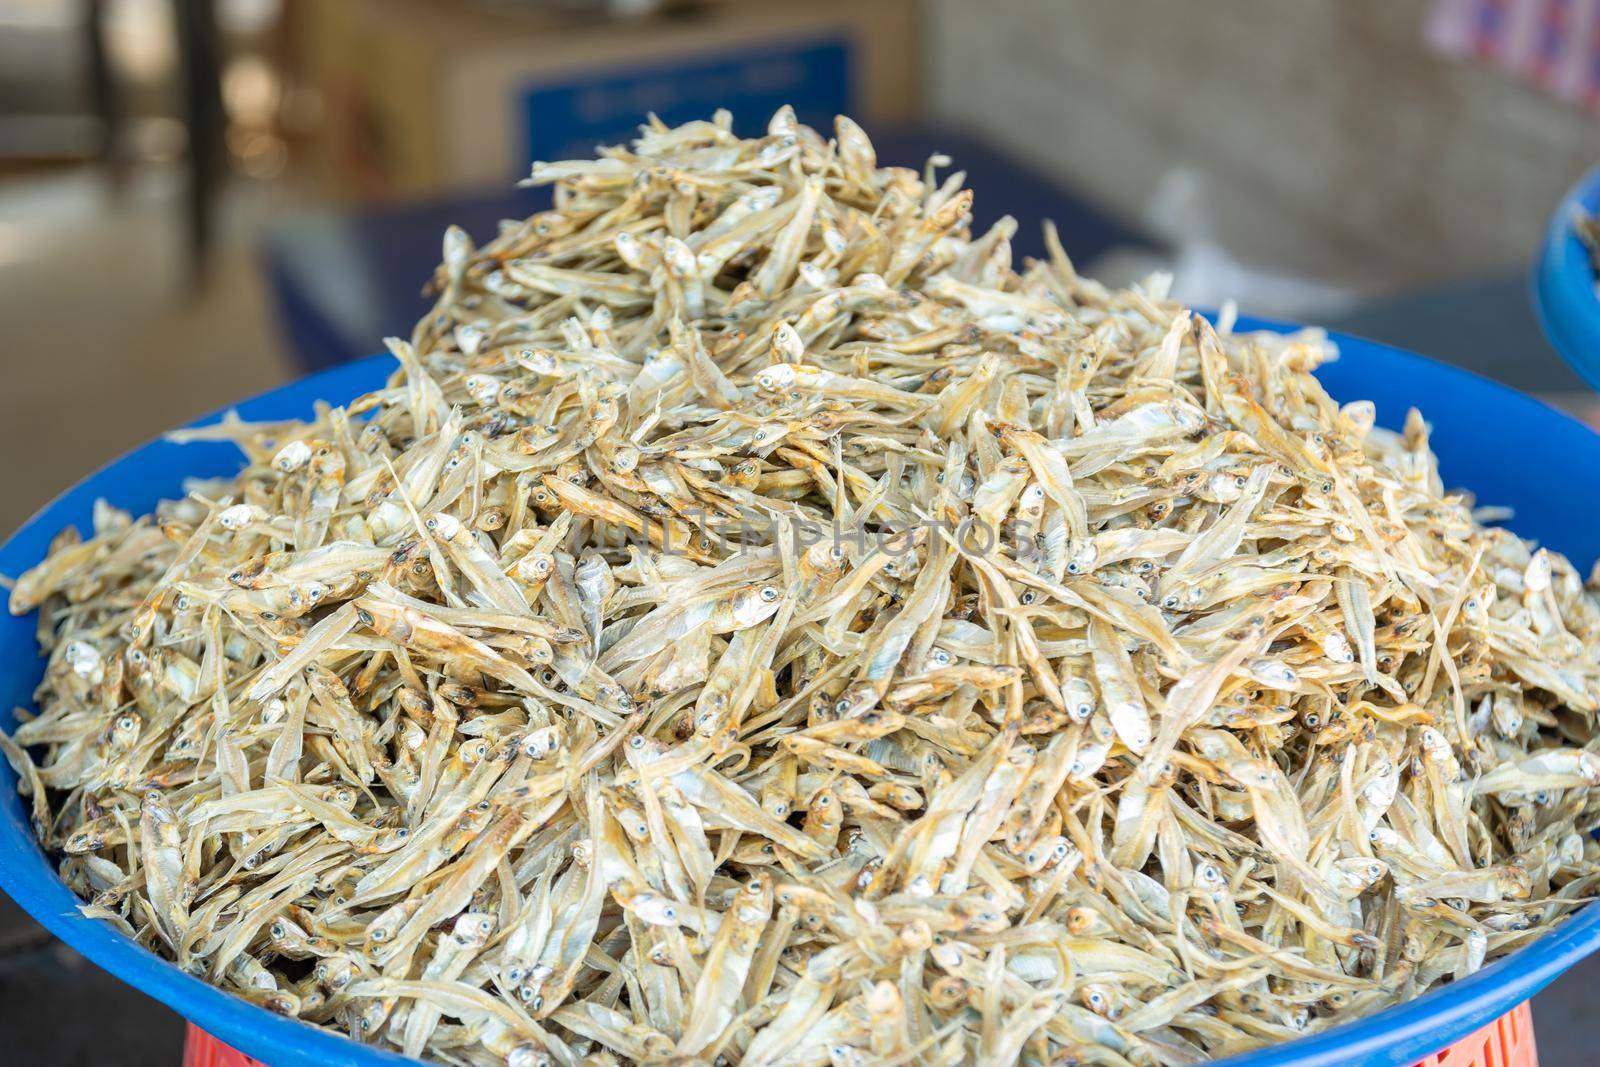 Group of small sea fish dried for sale to tourists in the market.